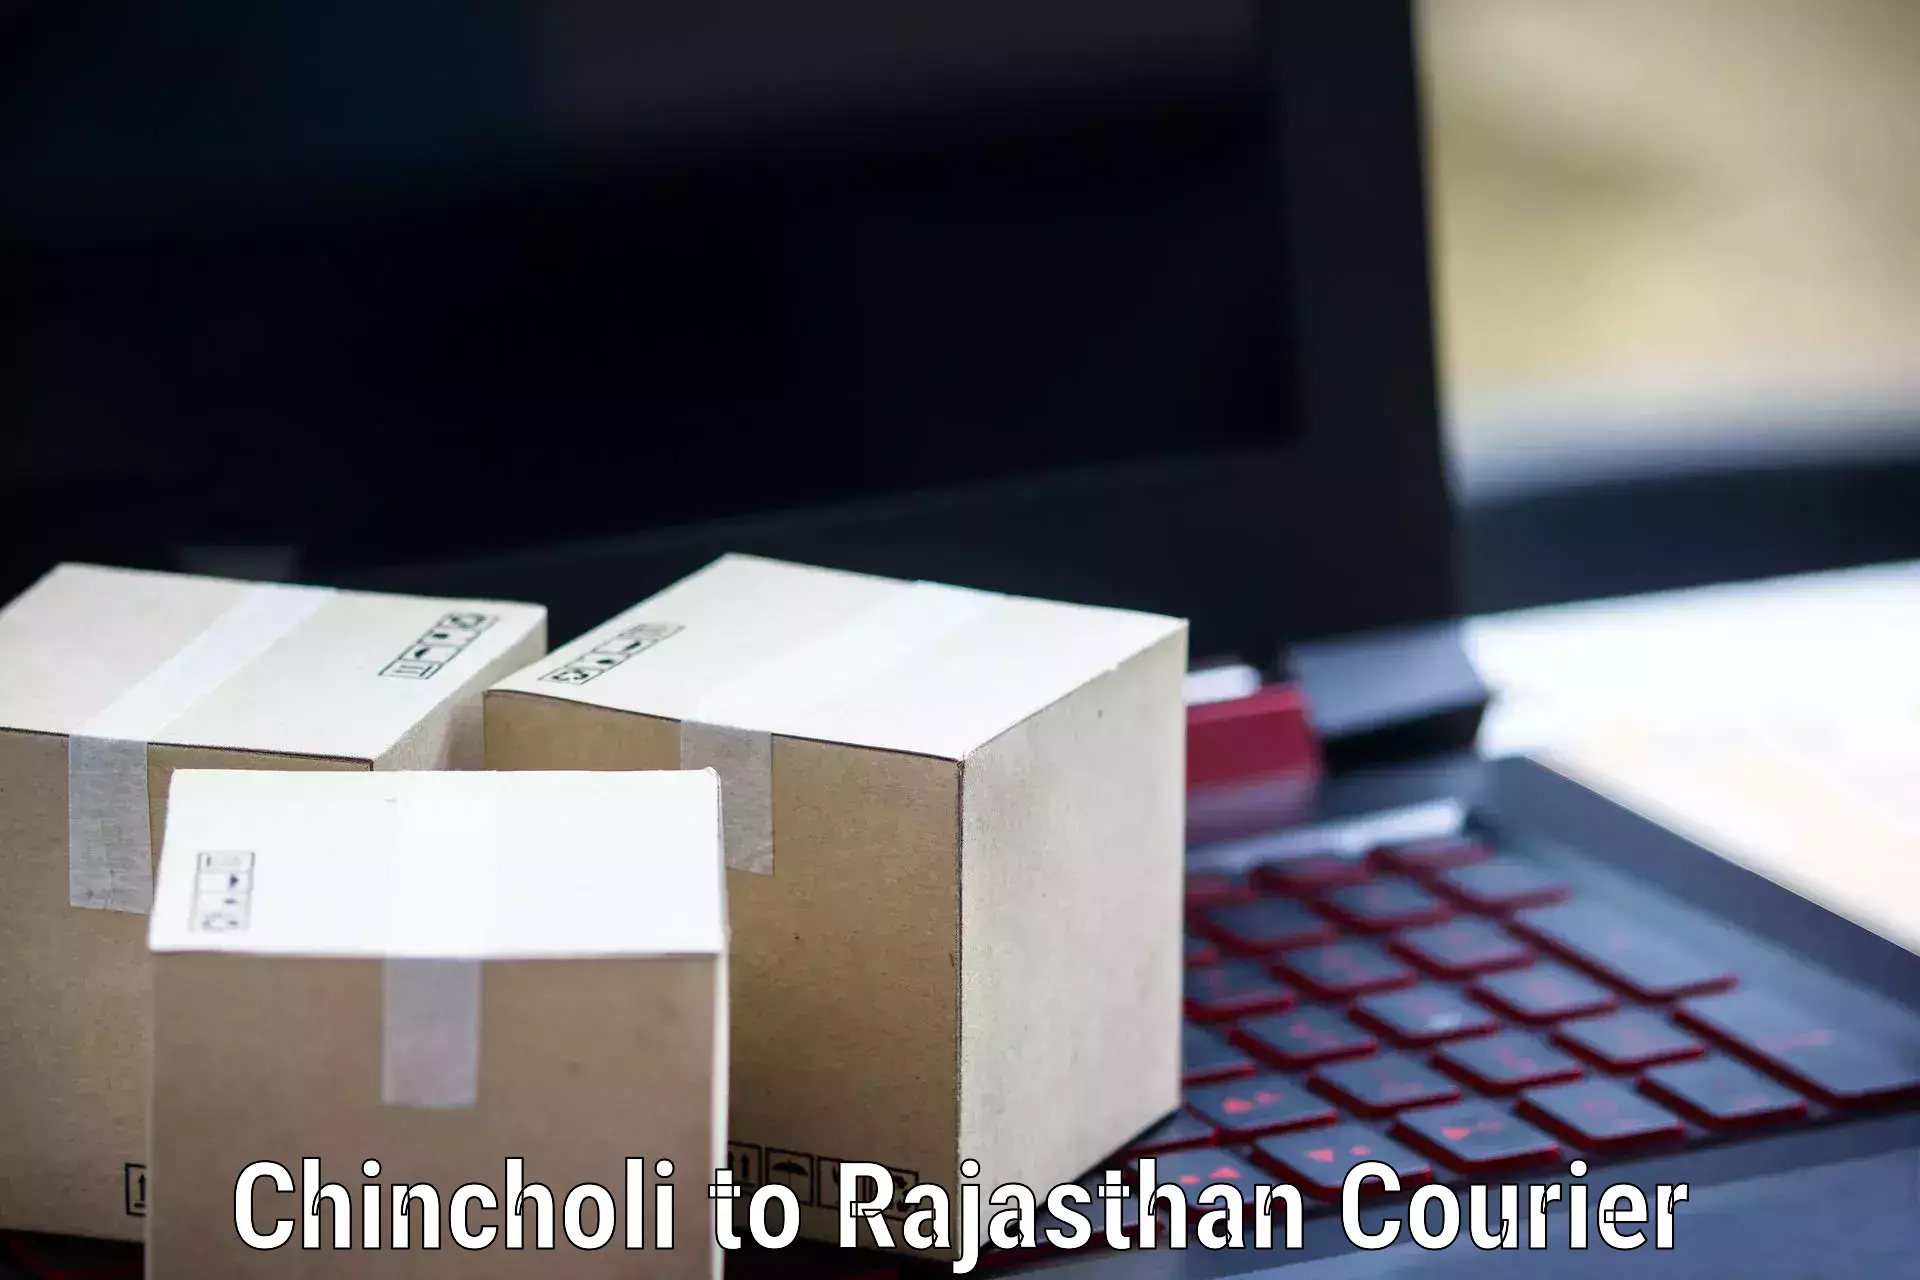 Express delivery capabilities Chincholi to Deogarh Rajsamand